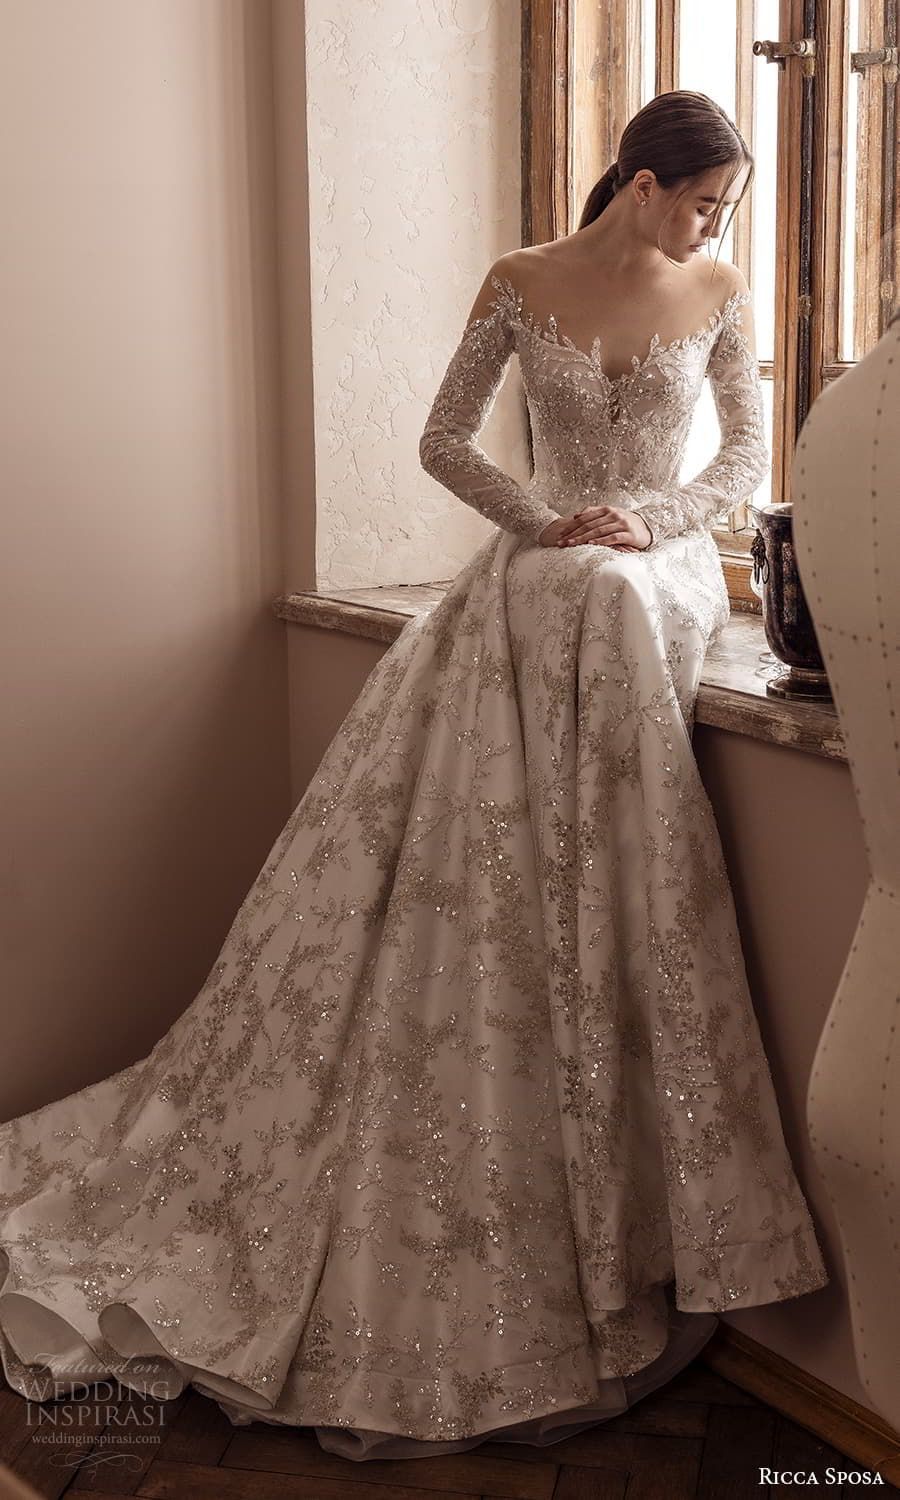 Let everyone get amazed by your Wedding ball gowns